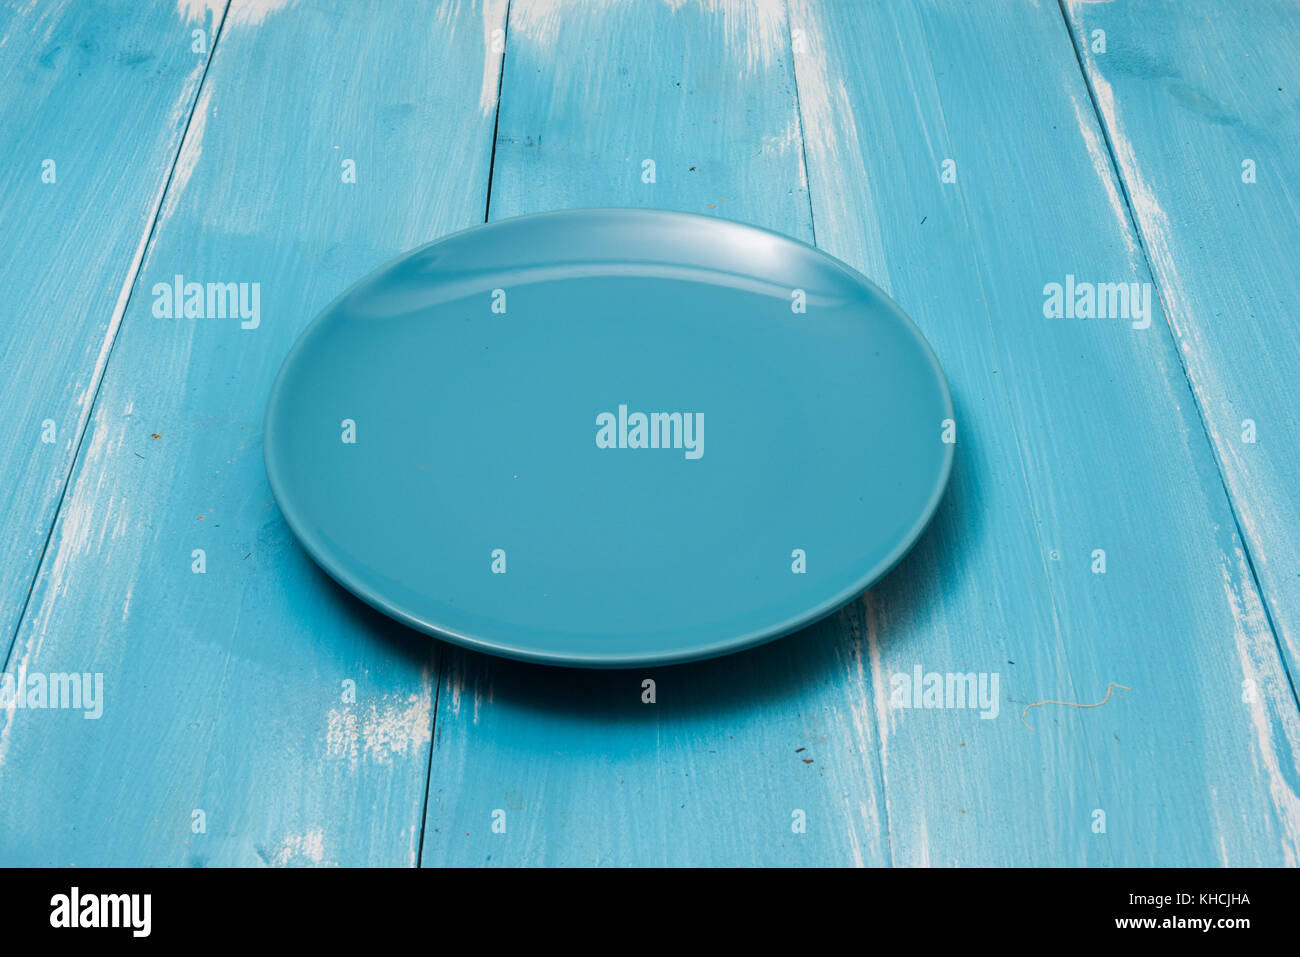 Blue Round plate on blue wooden table with perspective side view Stock Photo